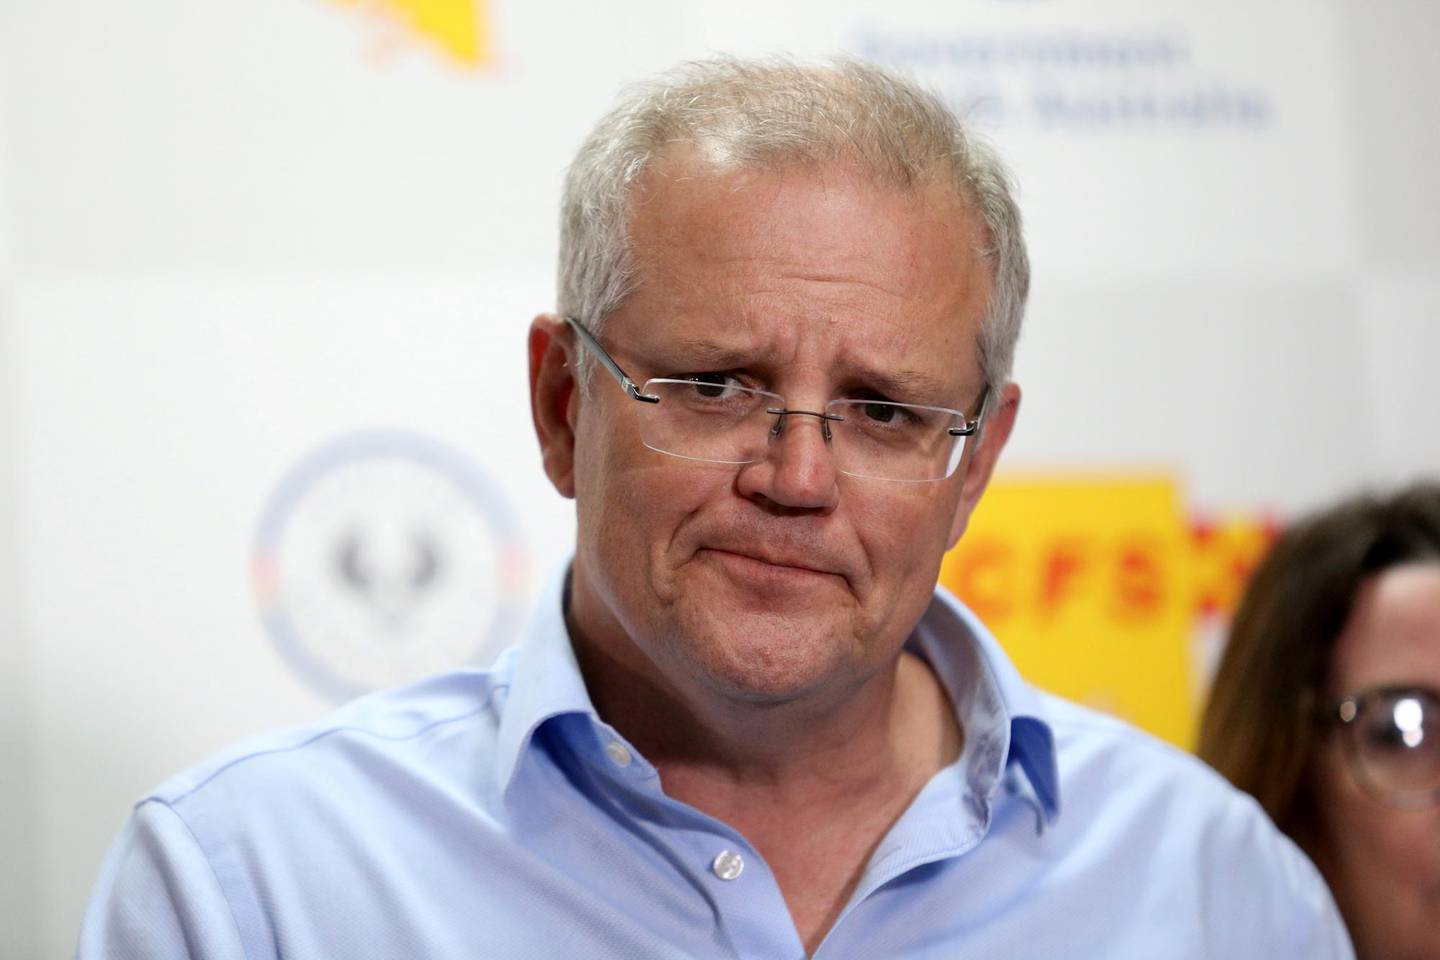 Australian Prime Minister Scott Morrison speaks to the media during a press conference at the Mt Barker CFS HQ in Mount Barker, Australia, December 24, 2019 while touring areas affected by the bushfires. AAP Image/Kelly Barnes via REUTERS ATTENTION EDITORS - THIS IMAGE HAS BEEN SUPPLIED BY A THIRD PARTY. NO RESALES. NO ARCHIVES. AUSTRALIA OUT. NEW ZEALAND OUT.